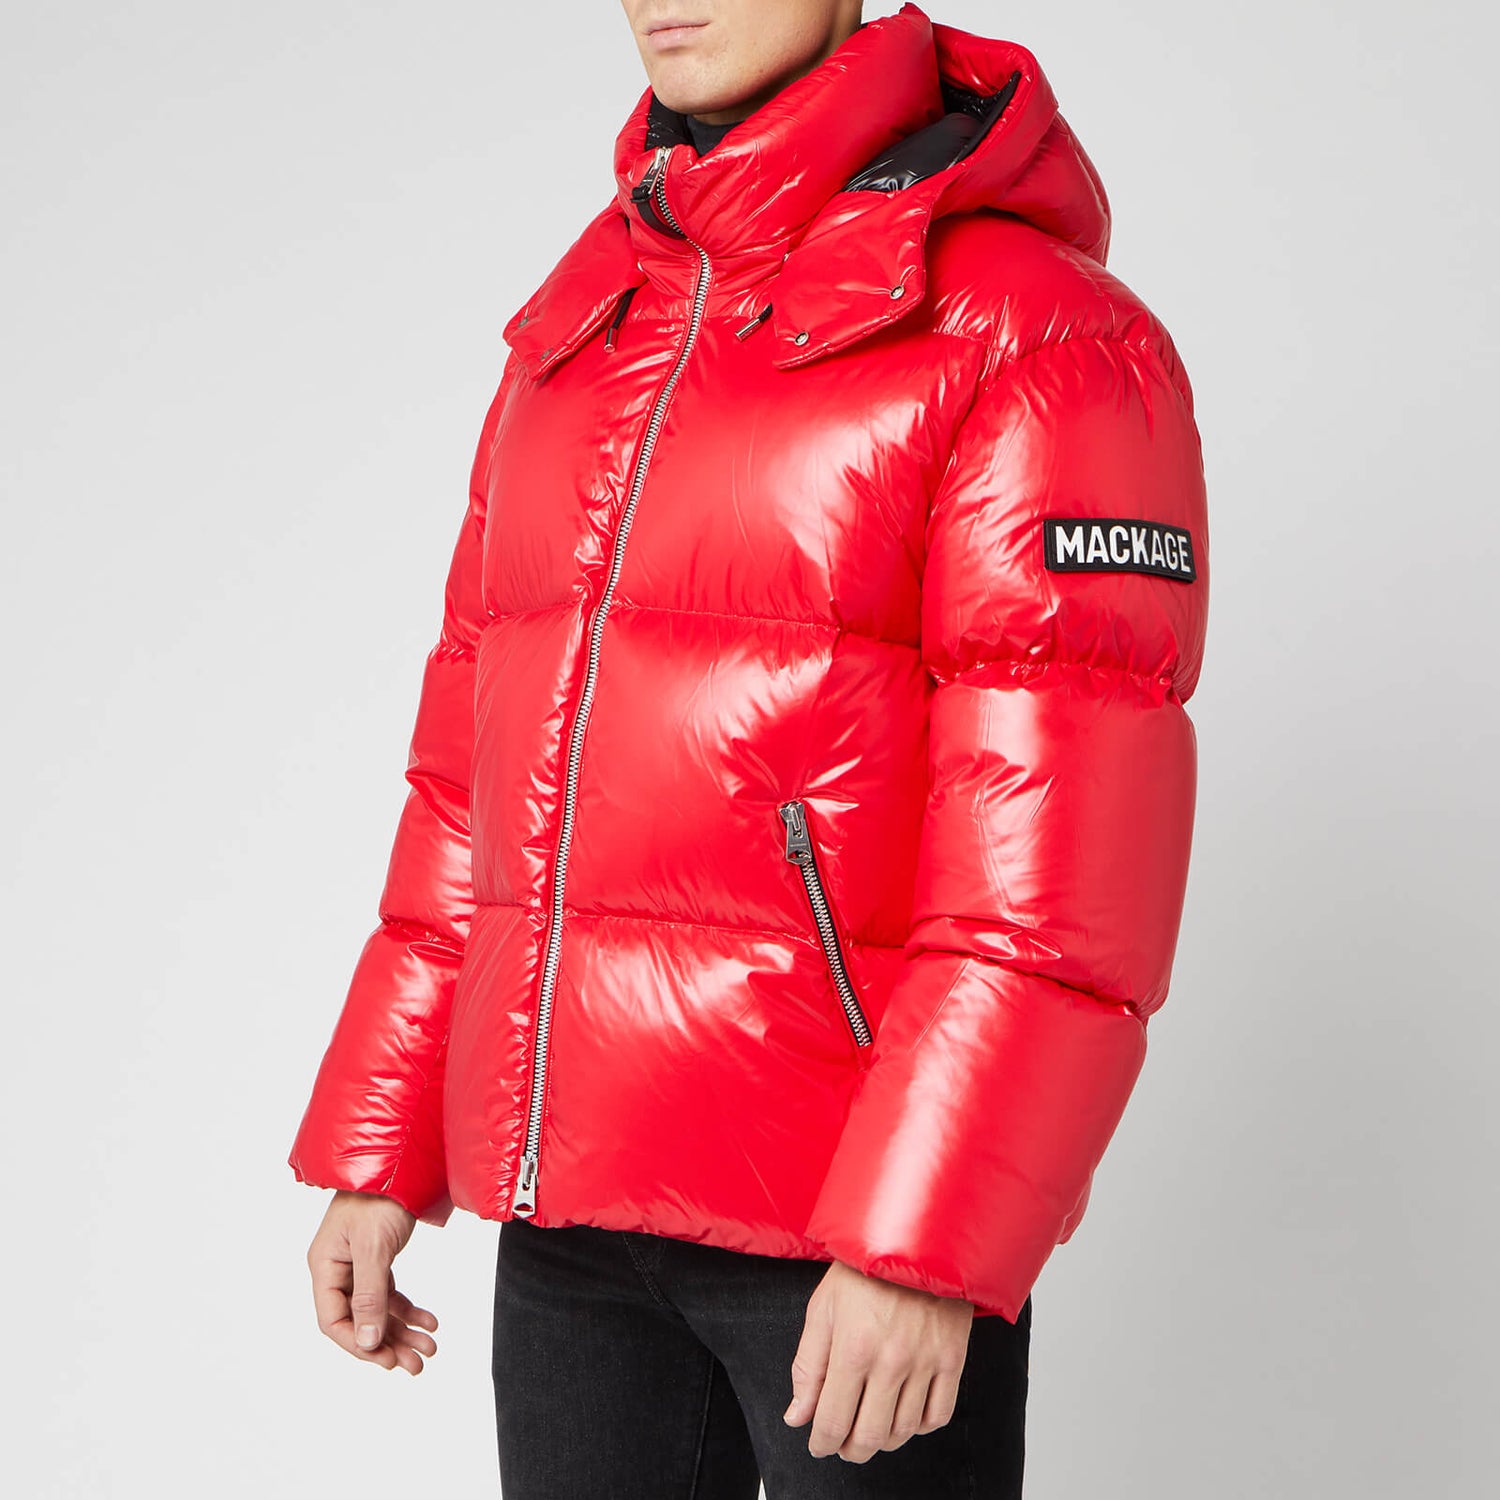 Mackage Men's Kent Down Jacket - Red - Free UK Delivery Available